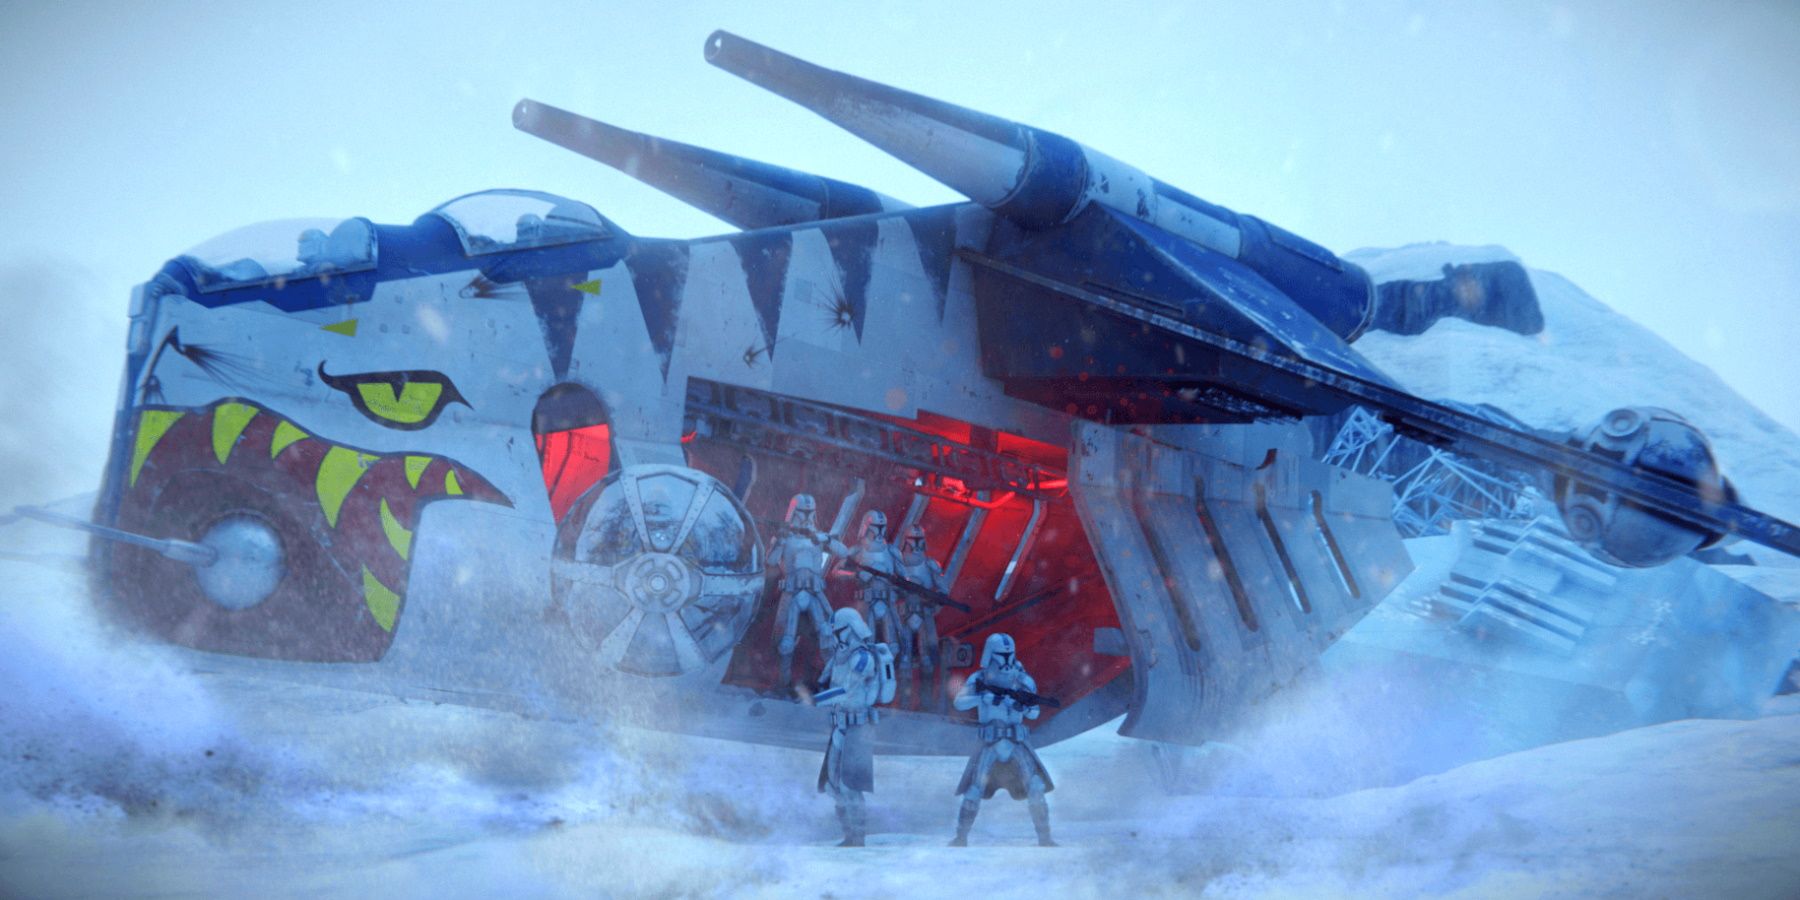 Several clone troopers in winter gear disembark from a Republic LAAT Gunship with shark-tooth markings.